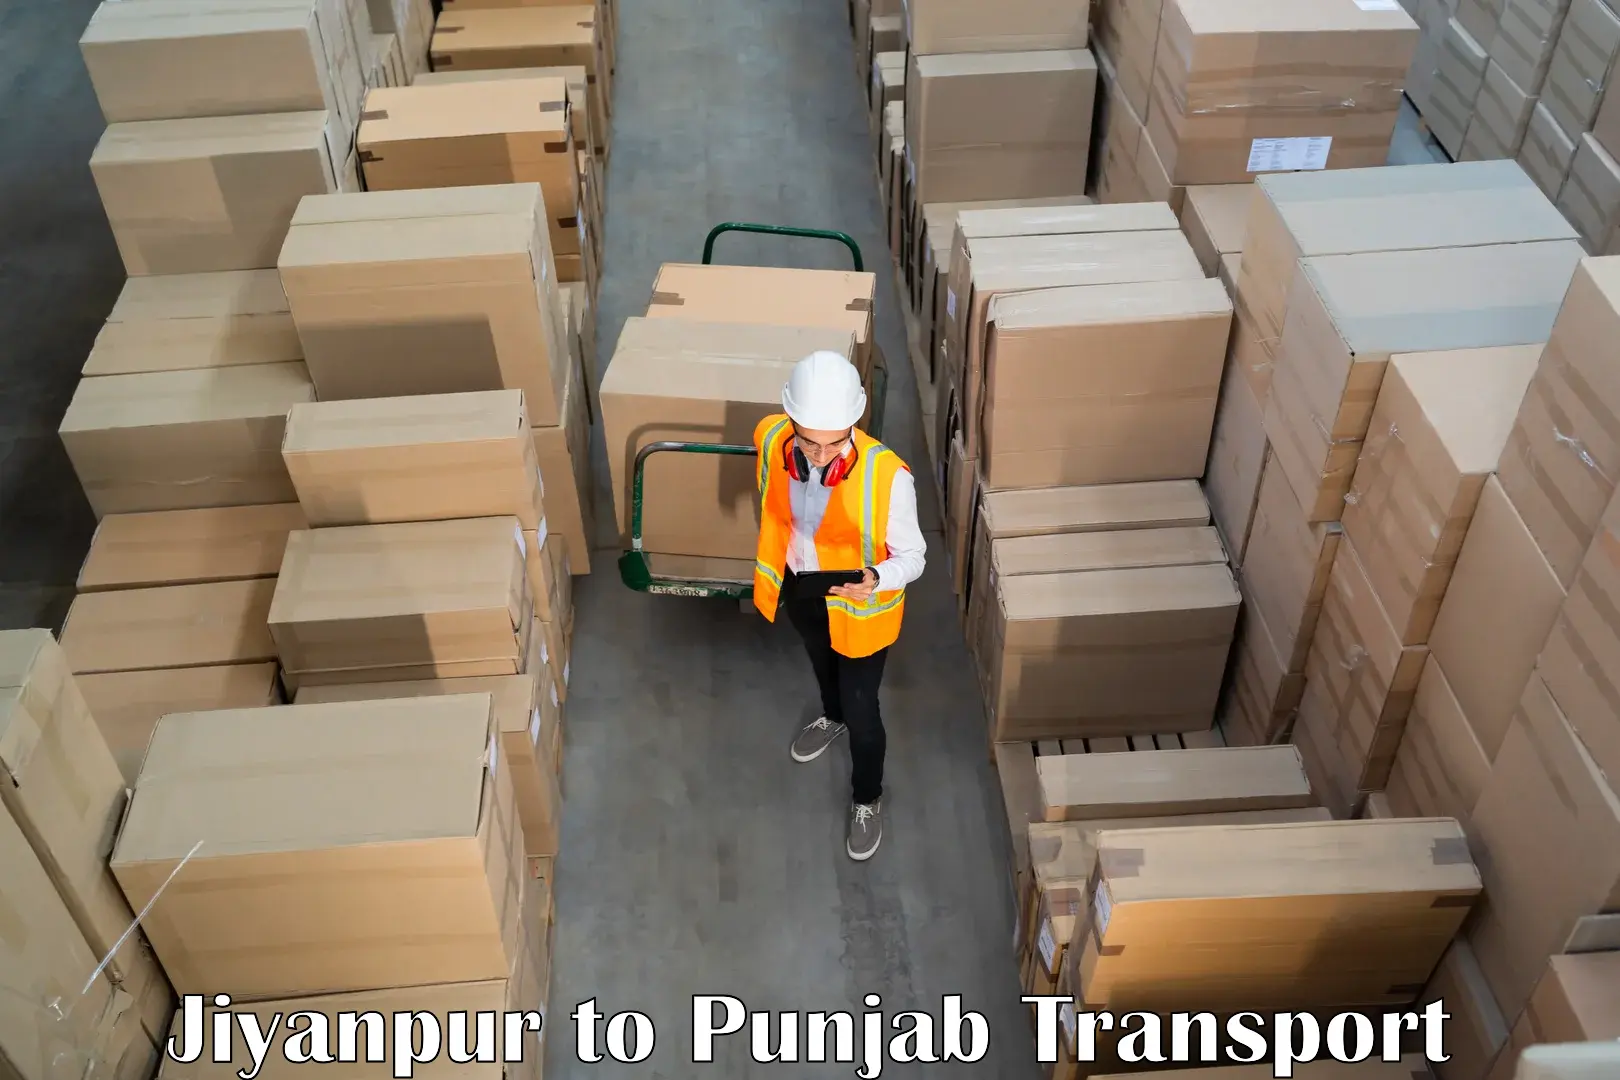 Parcel transport services Jiyanpur to Mukerian